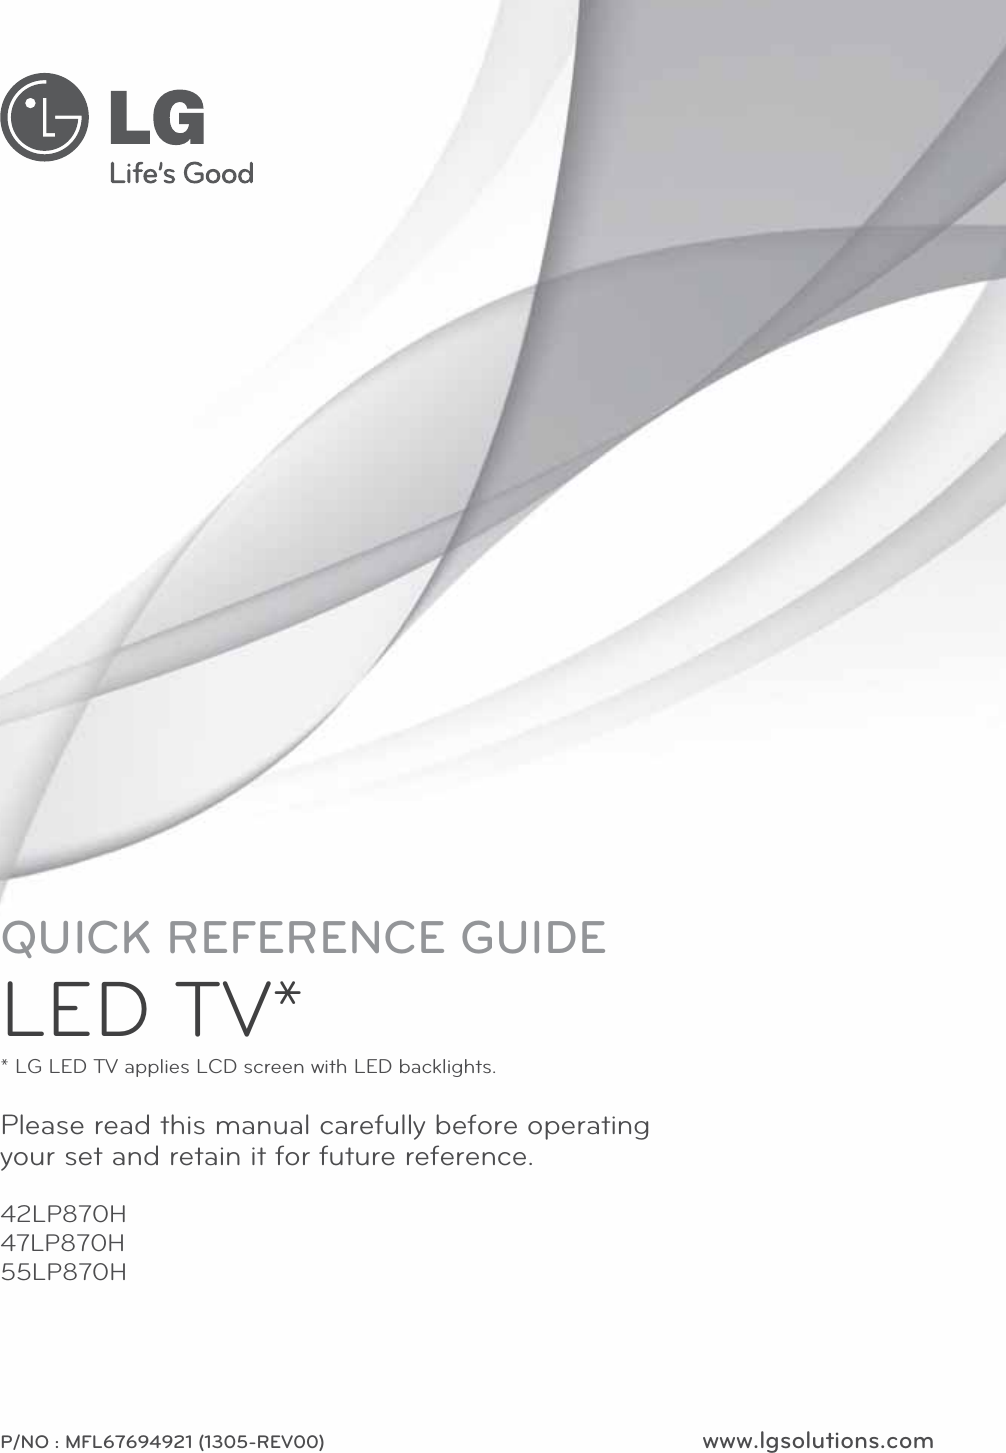 www.lgsolutions.comP/NO : MFL67694921 (1305-REV00)42LP870H47LP870H55LP870HPlease read this manual carefully before operating your set and retain it for future reference.QUICK REFERENCE GUIDELED TV** LG LED TV applies LCD screen with LED backlights.